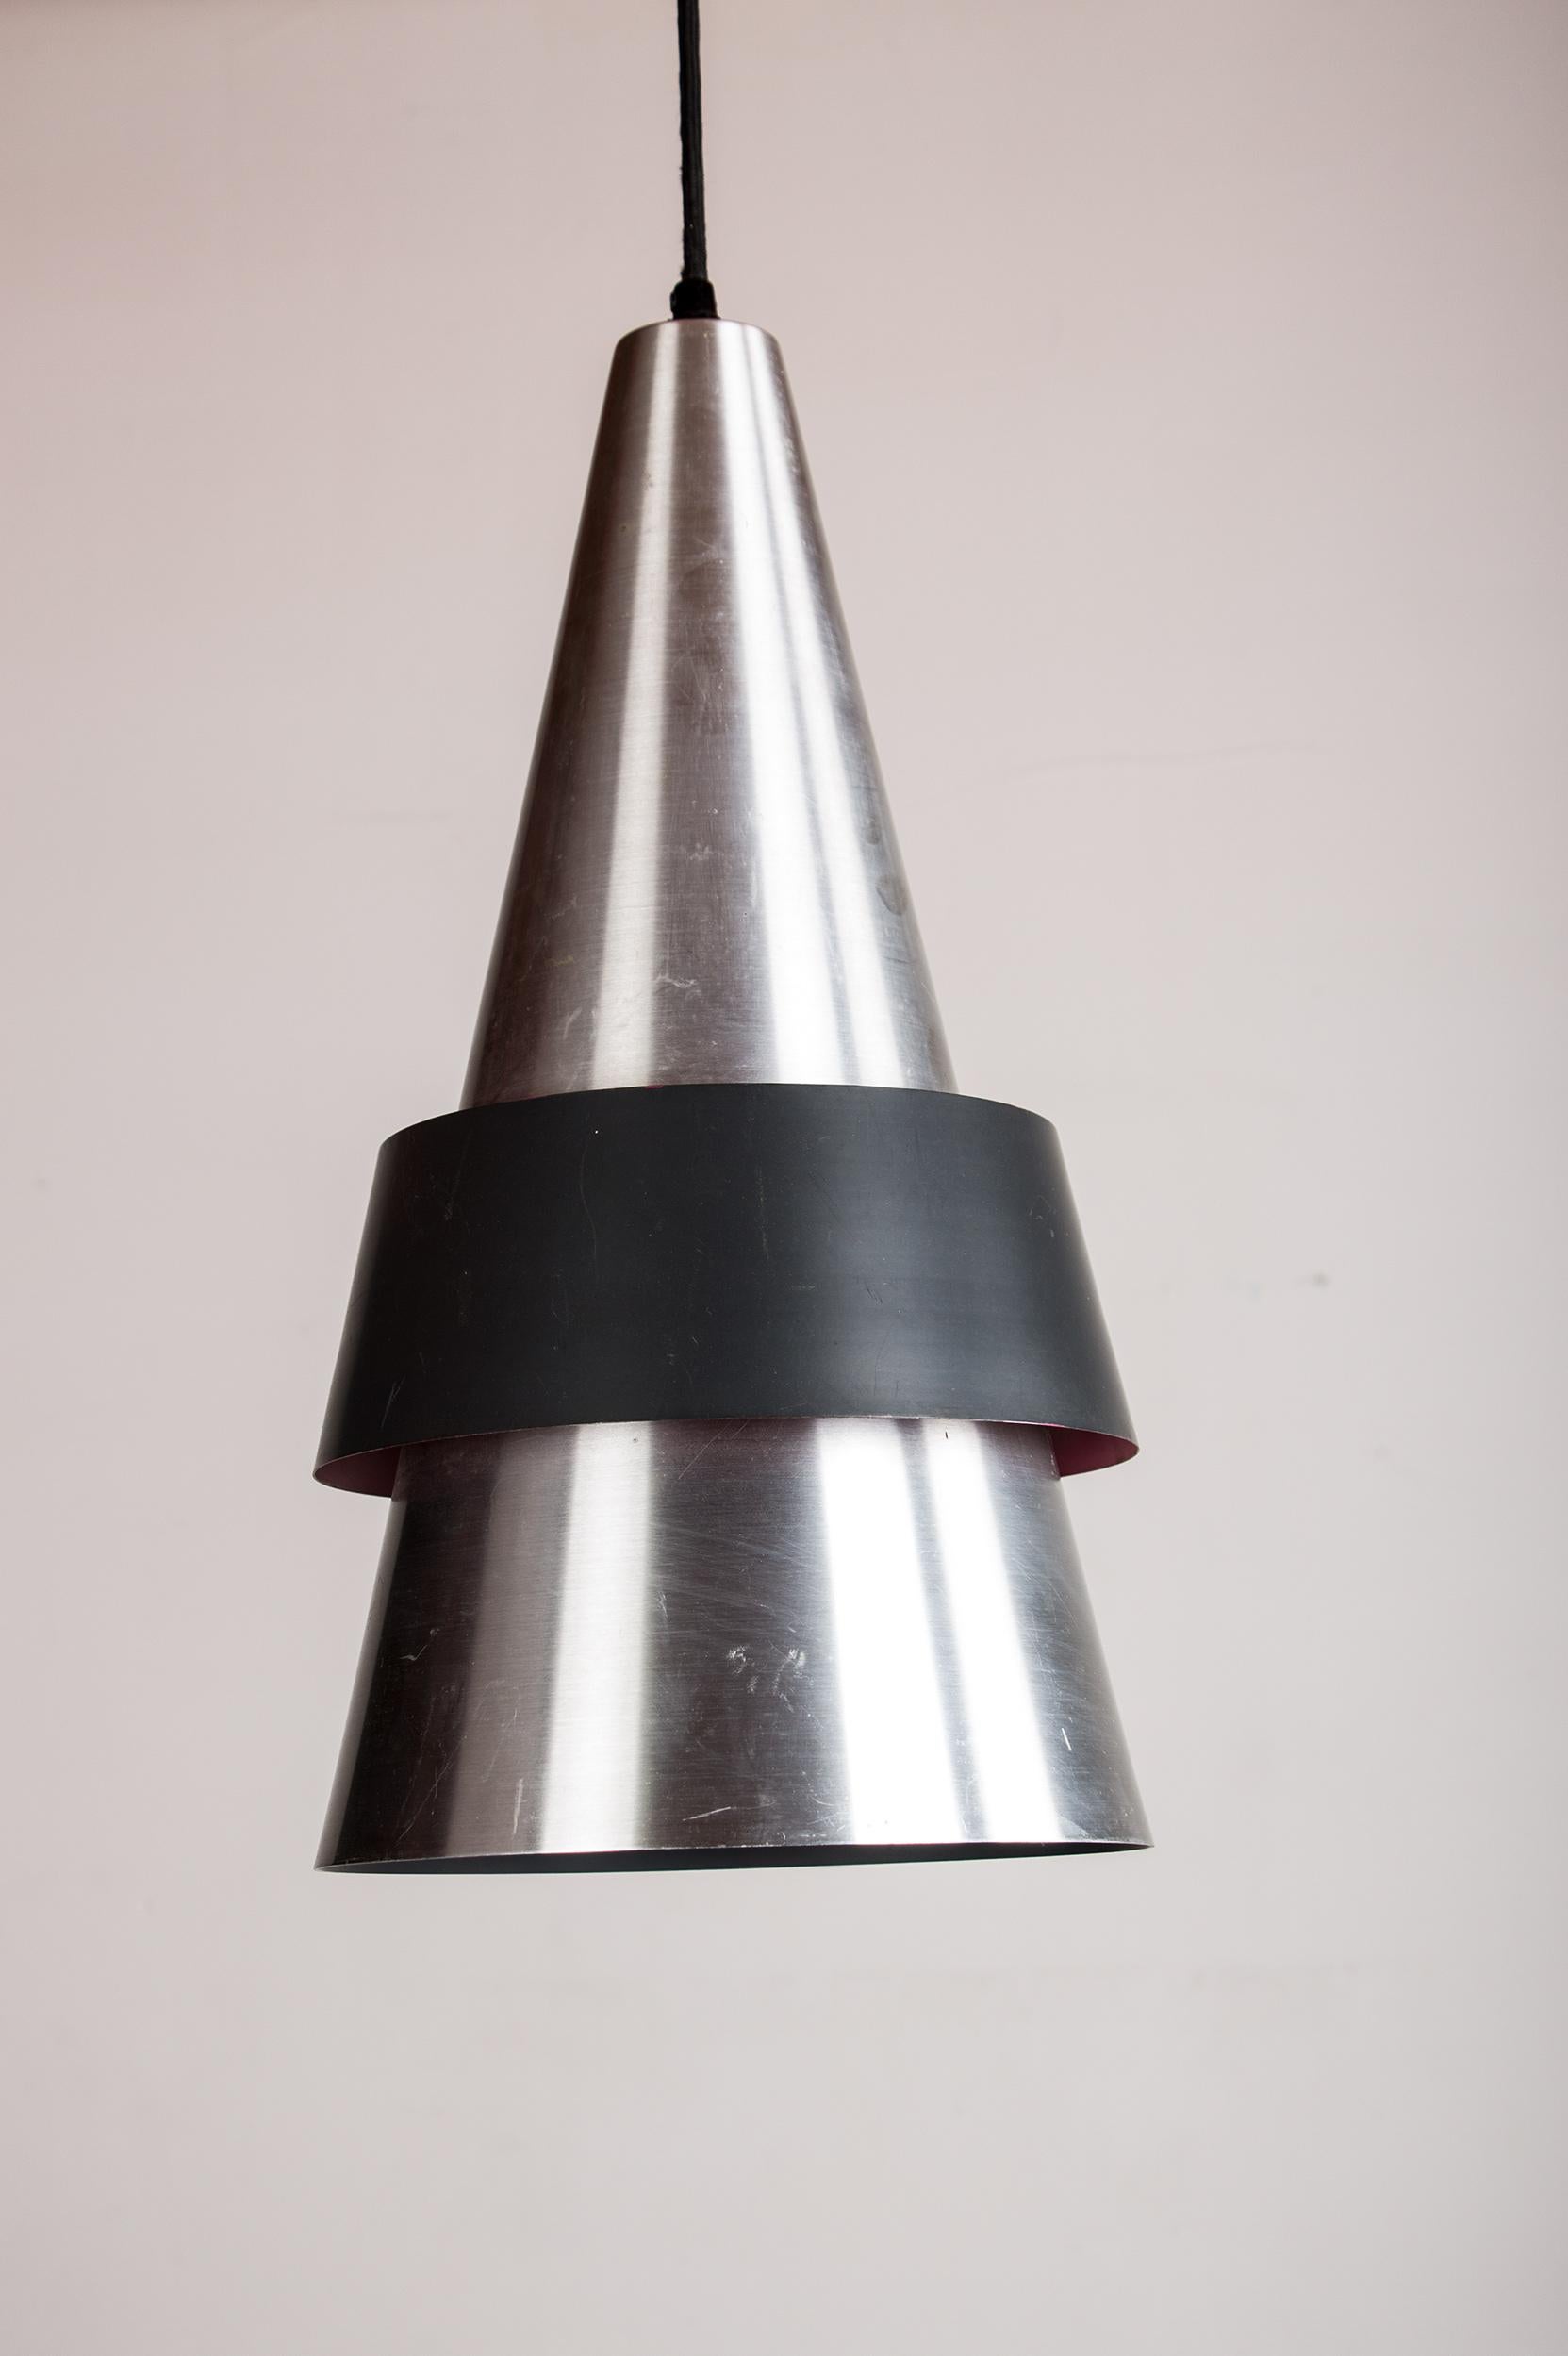 Superb Scandinavian pendant light. Made up of a large aluminum cone lined with a grained black metal cone, it offers very intimate nuanced lighting. Total height widely adjustable according to need (more than 150 cm).
